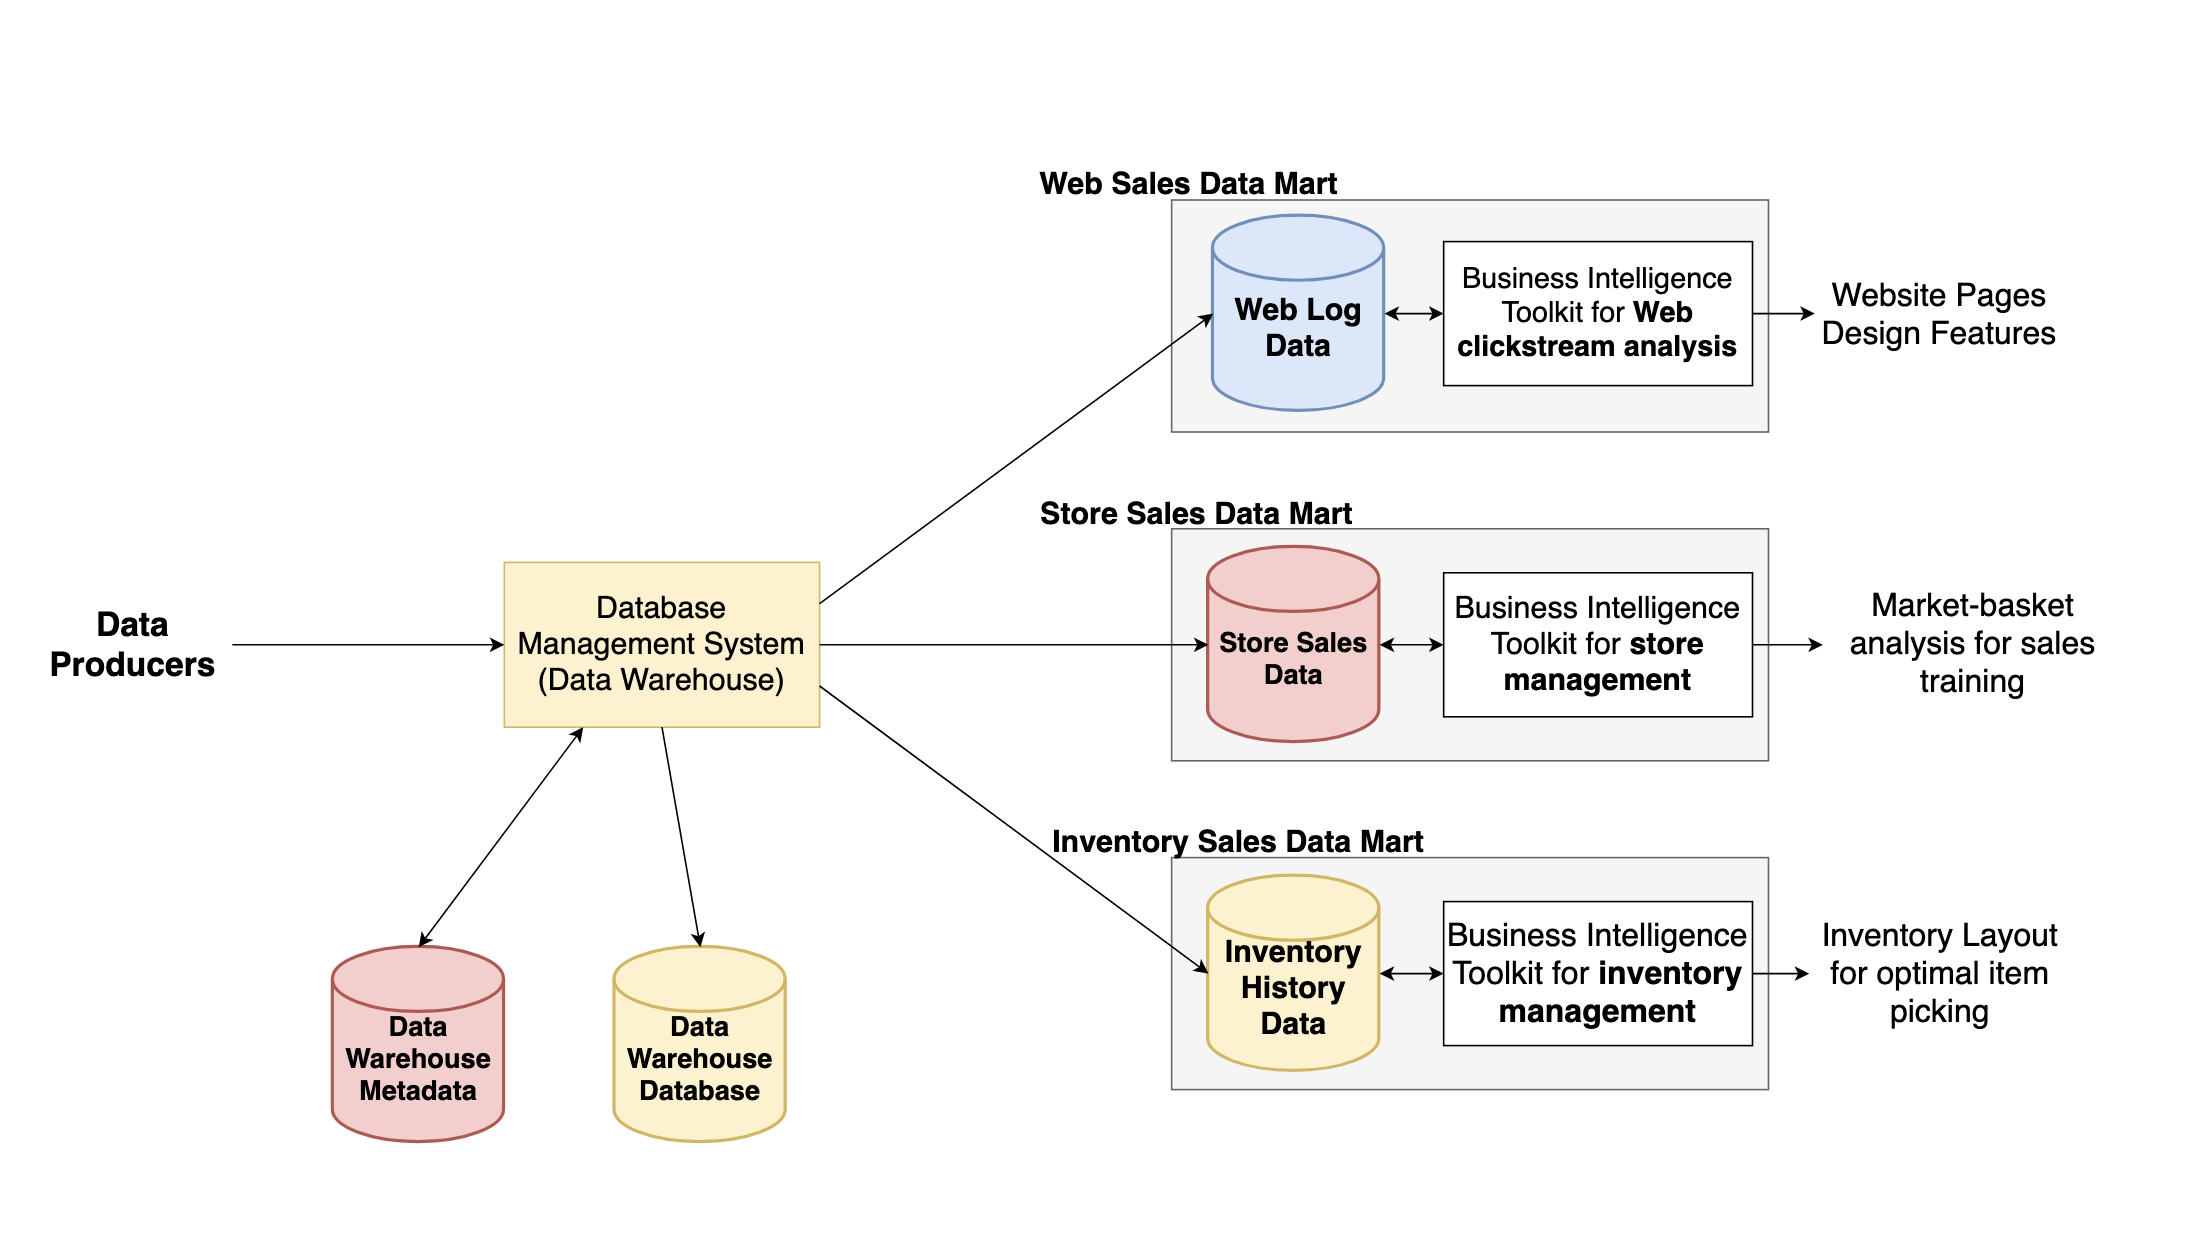 data from the data producers flow to the data warehouse, which has meta data that flows to and from the database to the database management system for the data warehouse. From the data warehouse data flows to the web sales data mart (business intelligence toolkit for web click stream analysis) which is pushed to website pages design features. Also from the data warehouse, data flows to the store sales data mart (business intelligence toolkit for store management) which then translates to market-basket analysis for sales training. The last data mart that flows from the data warehouse is the inventory sales data mart (business intelligence toolkit for inventory management) which translates to inventory layouts for optimal item picking.